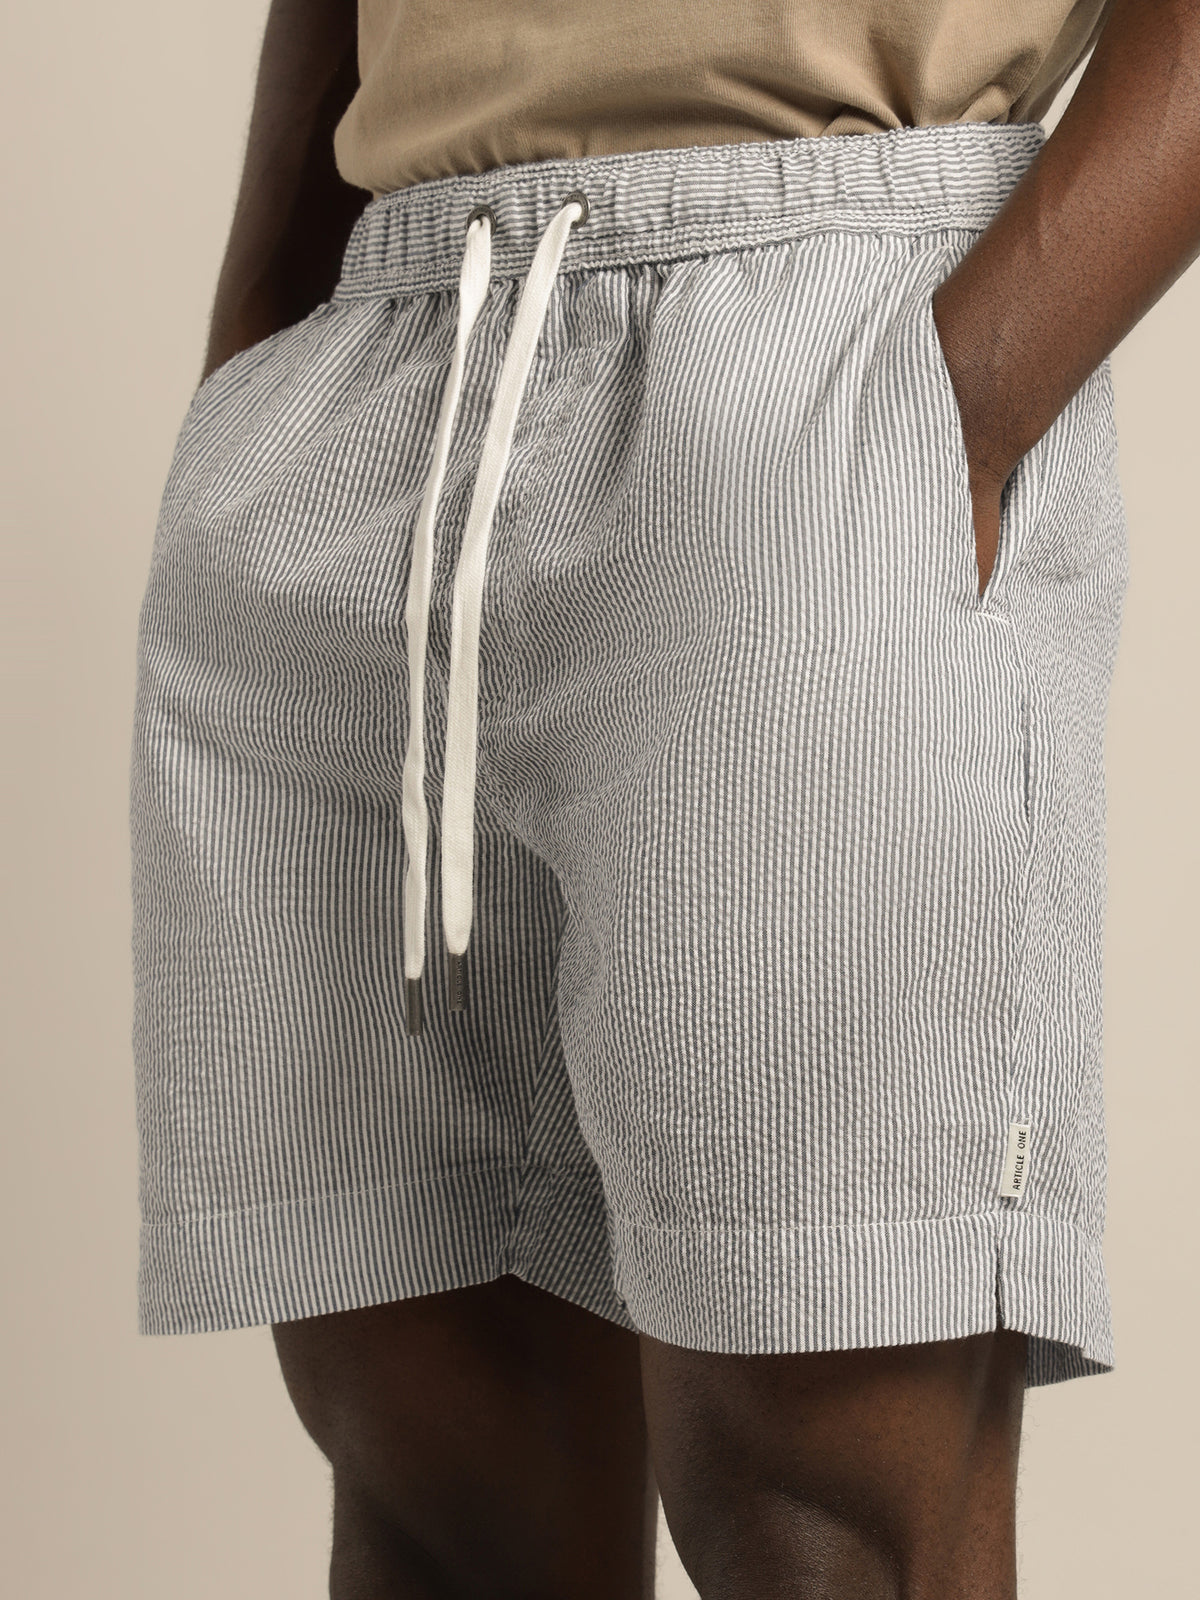 Wilfred Shorts in Blue &amp; White Stripe